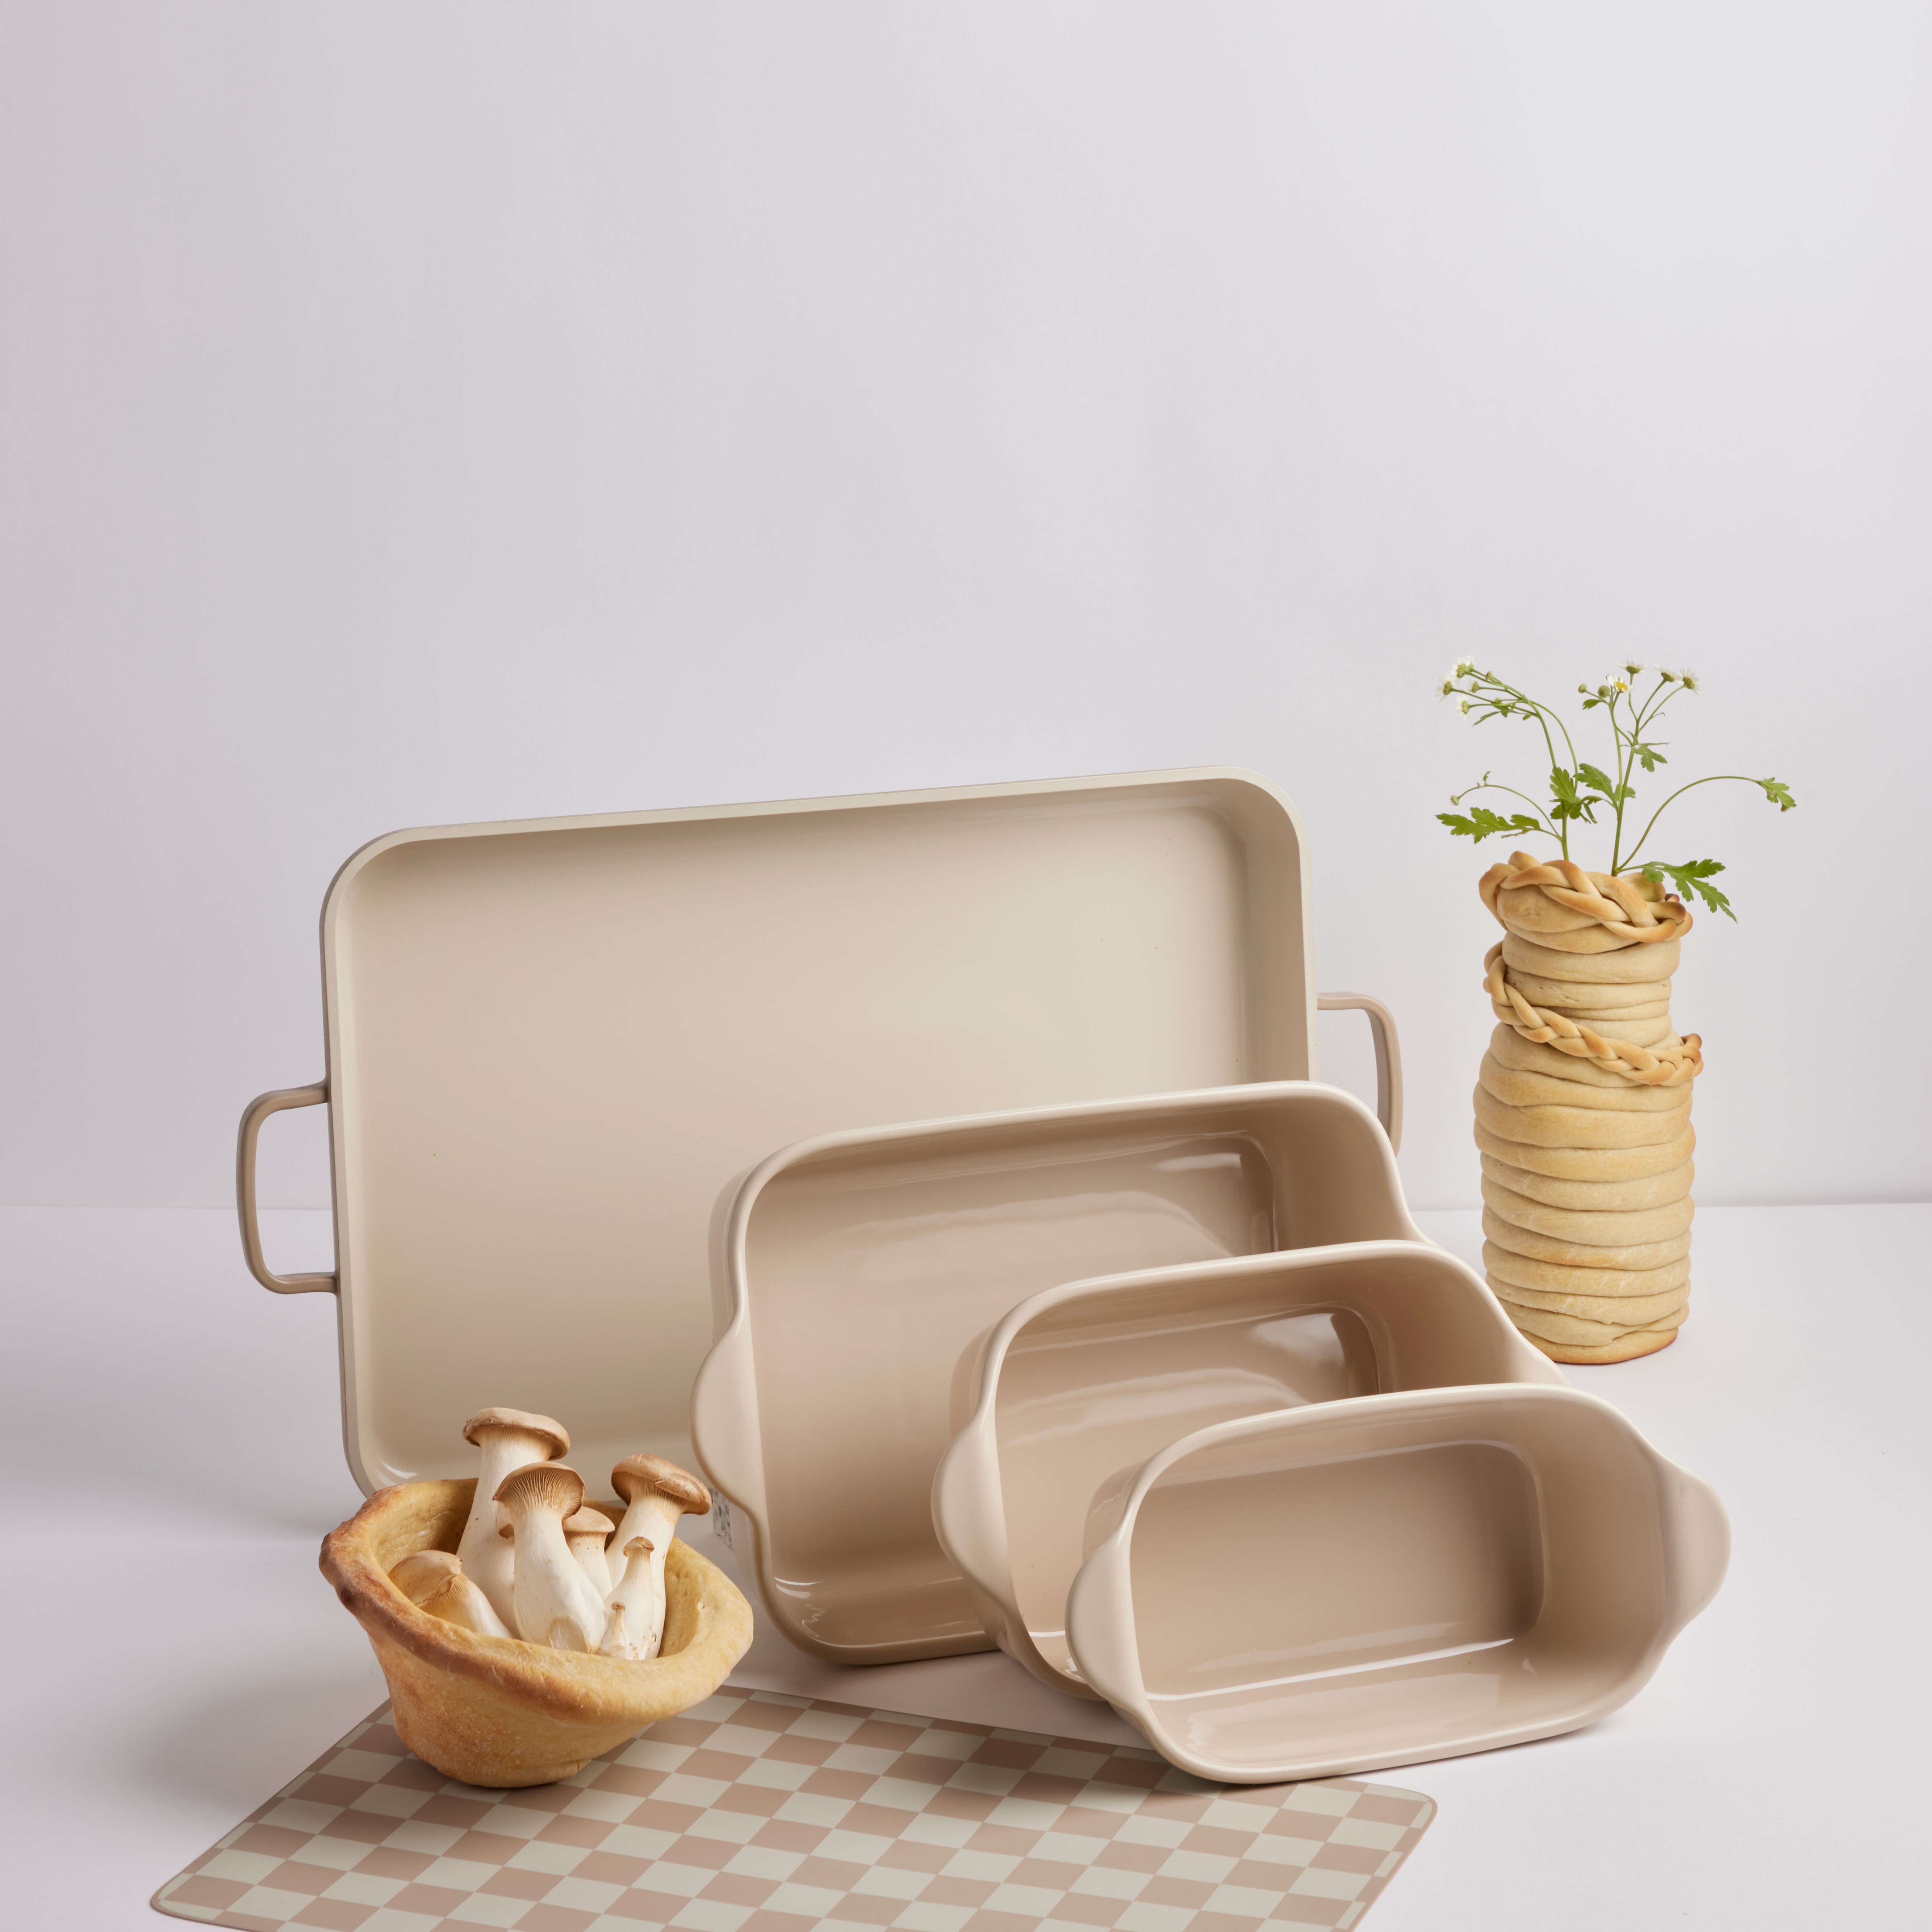 Our Place launches ovenware: Our Place launches oven collection